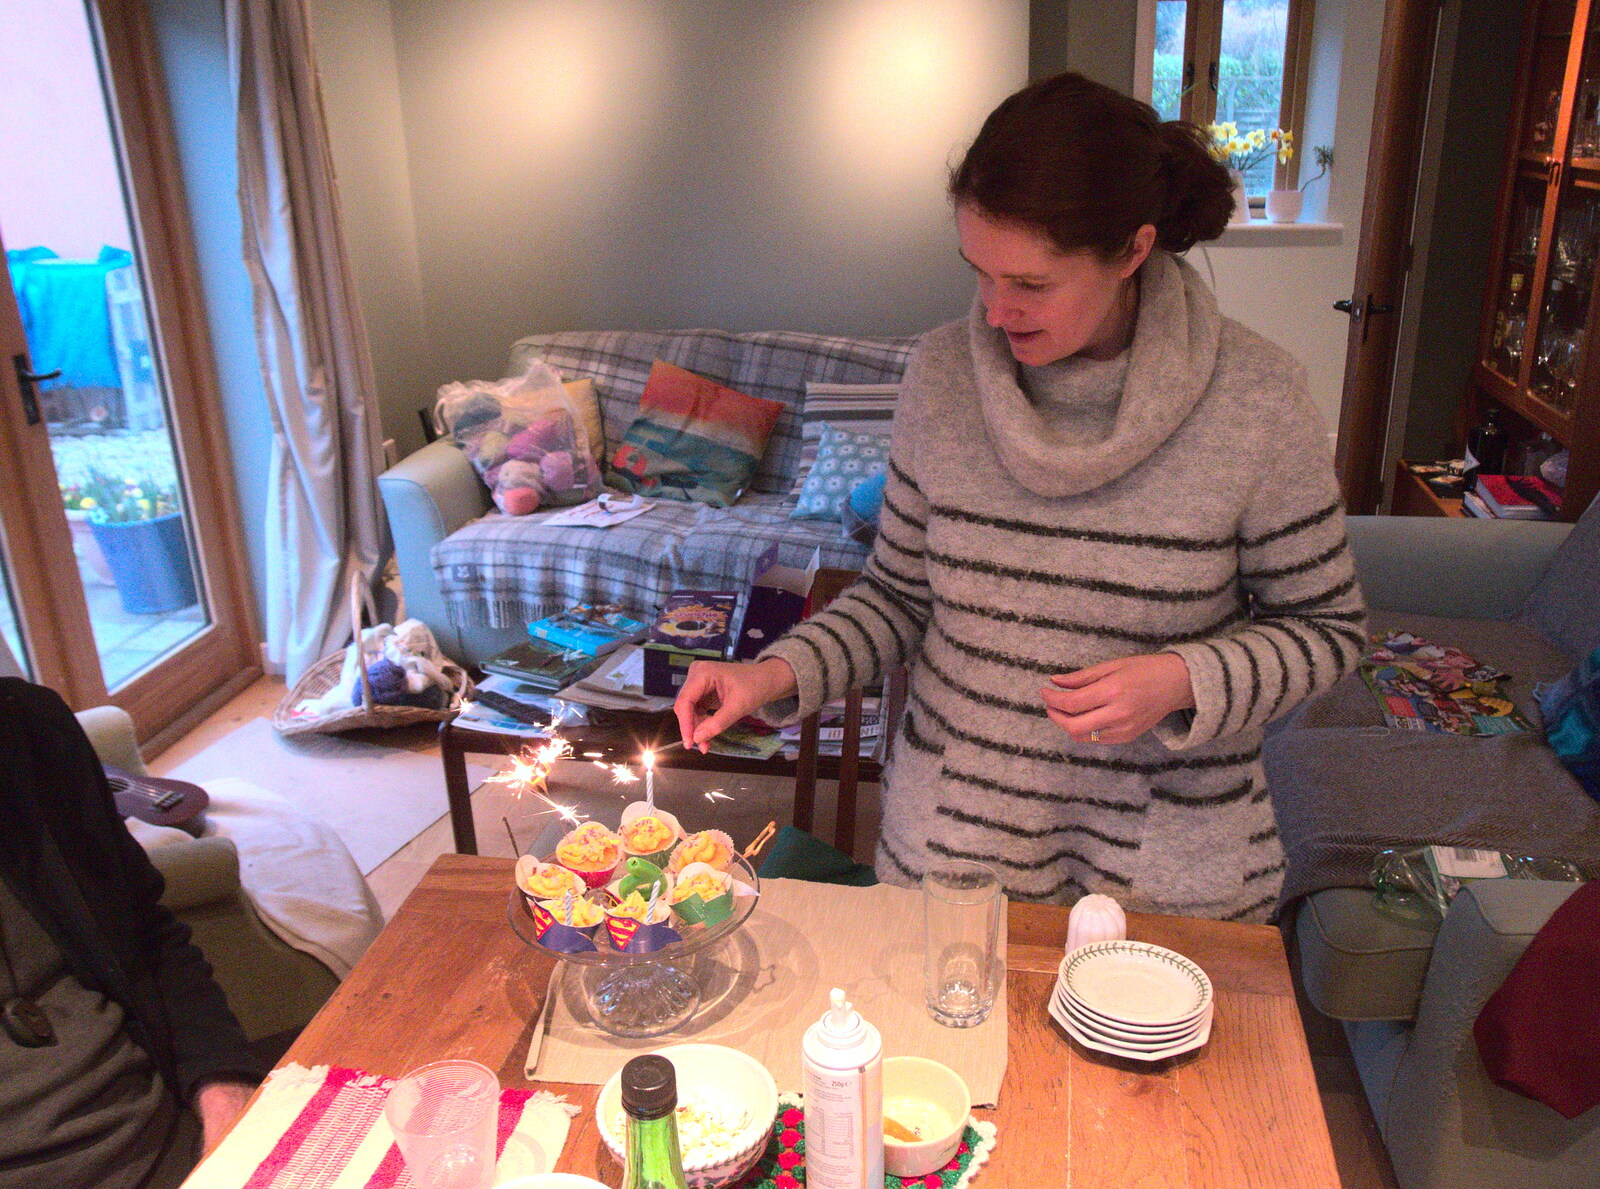 Isobel lights some candles from Trackside Graffiti, and Harry's Cake, London and Suffolk - 28th March 2018